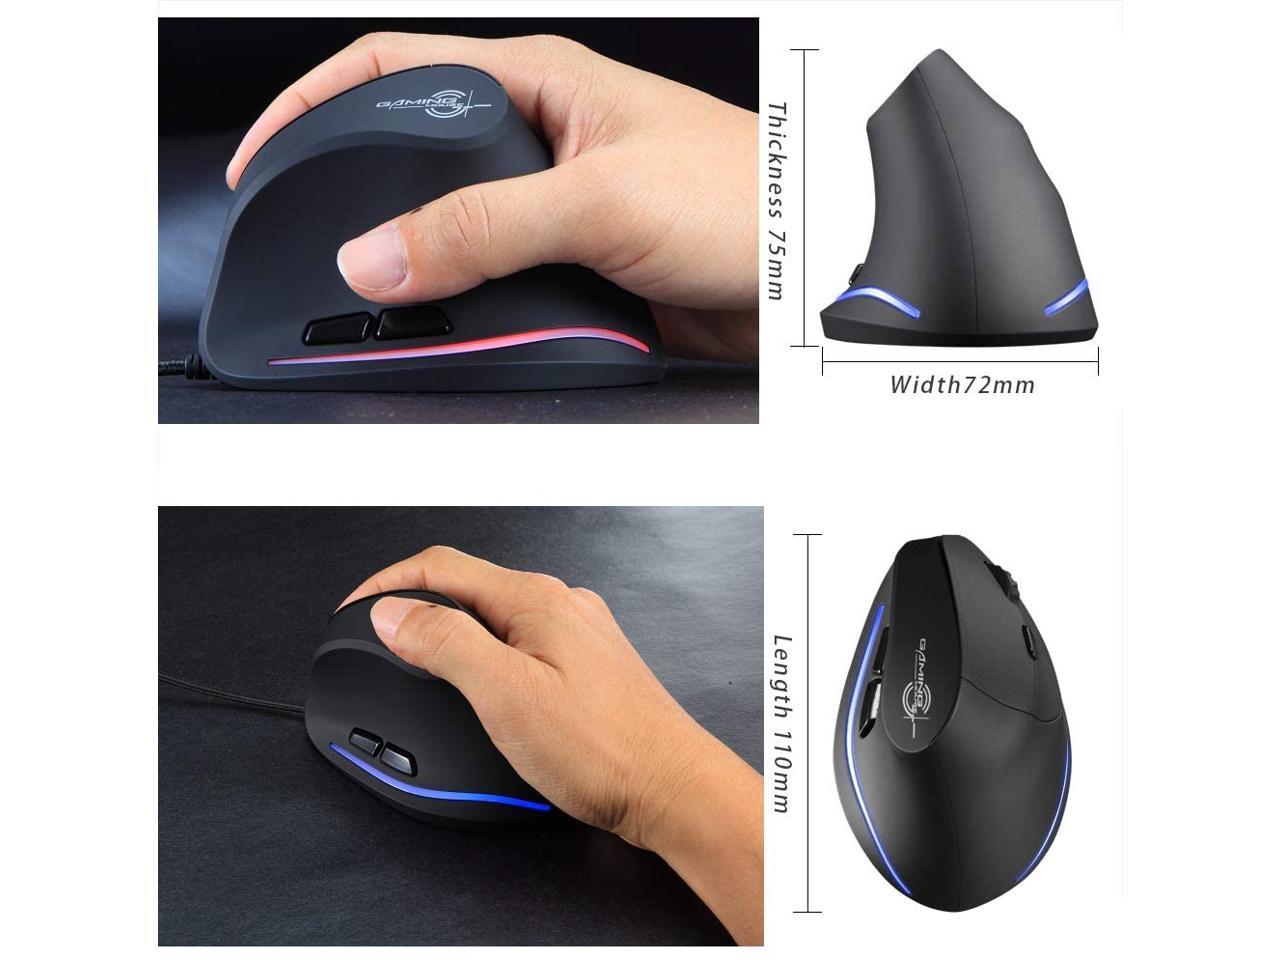 ZLOT Wired Vertical Mouse,Ergonomic Design USB LED Optical Mouse with 6